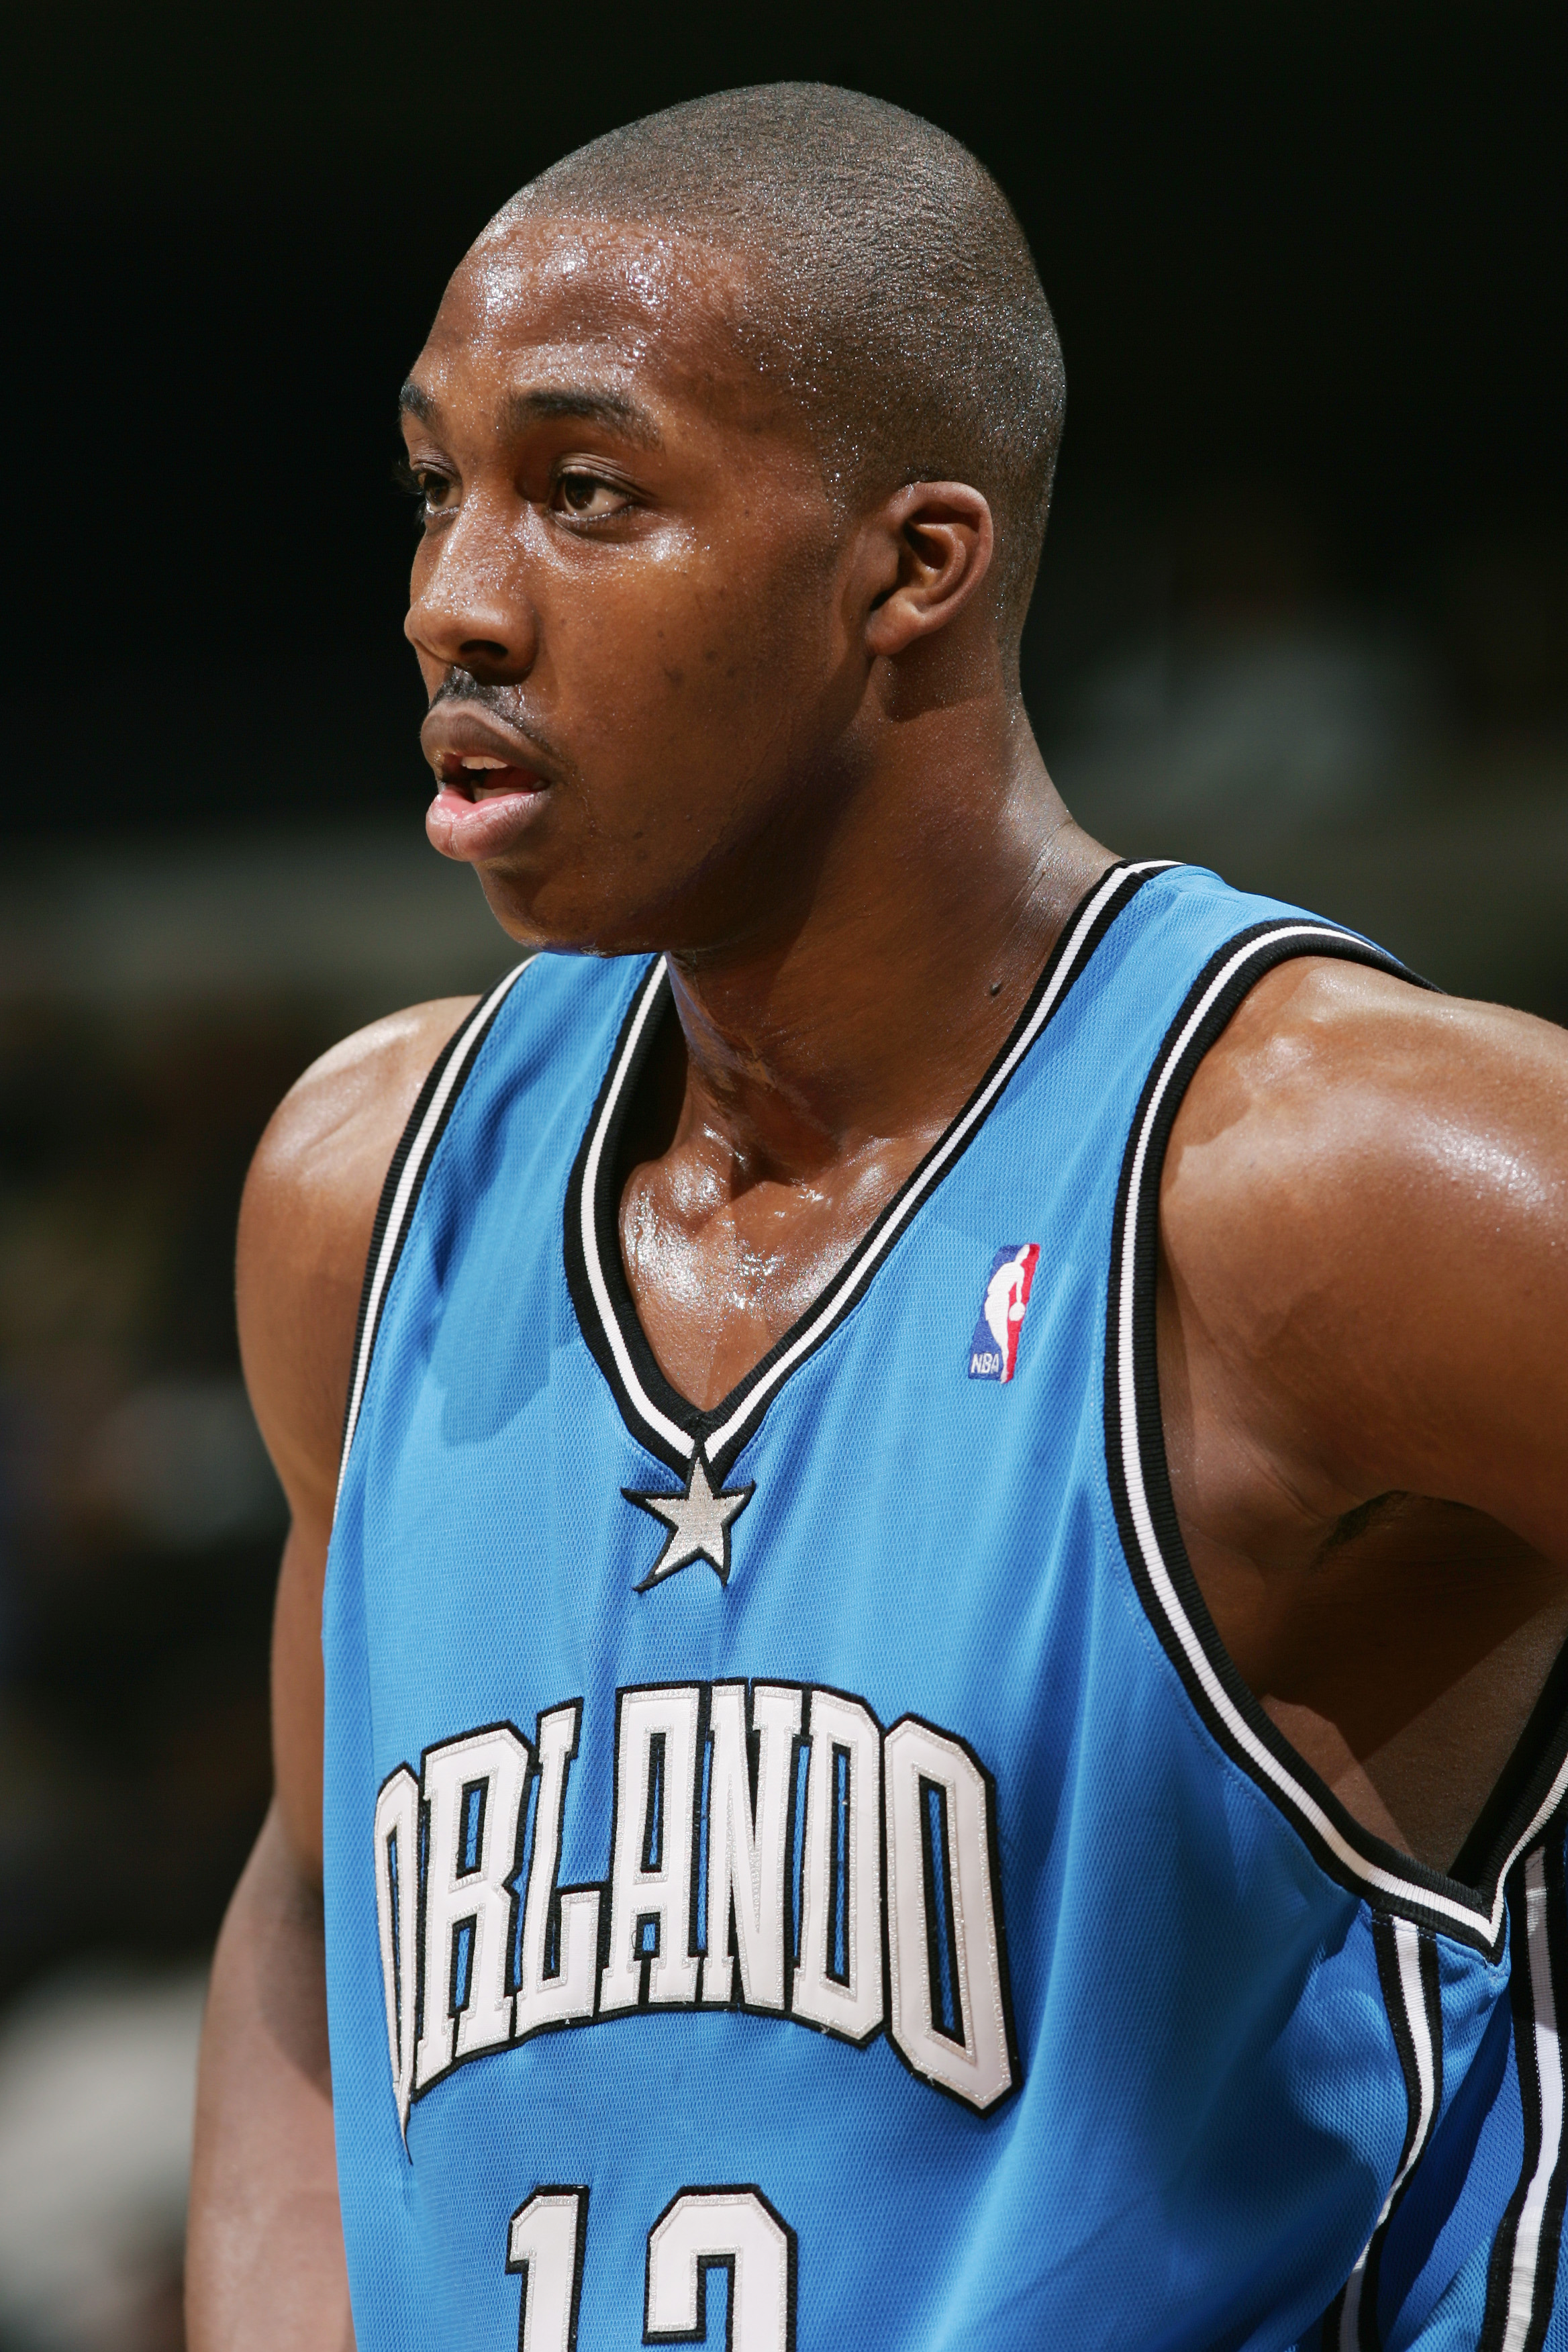 WAHINGTON - NOVEMBER 10:  Dwight Howard #12 of the Orlando Magic is seen on the court during the game against the Washington Wizards on November 10, 2004 at the MCI Center in Washington D.C.  The Wizards won 106-96. NOTE TO USER:  User expressly acknowled